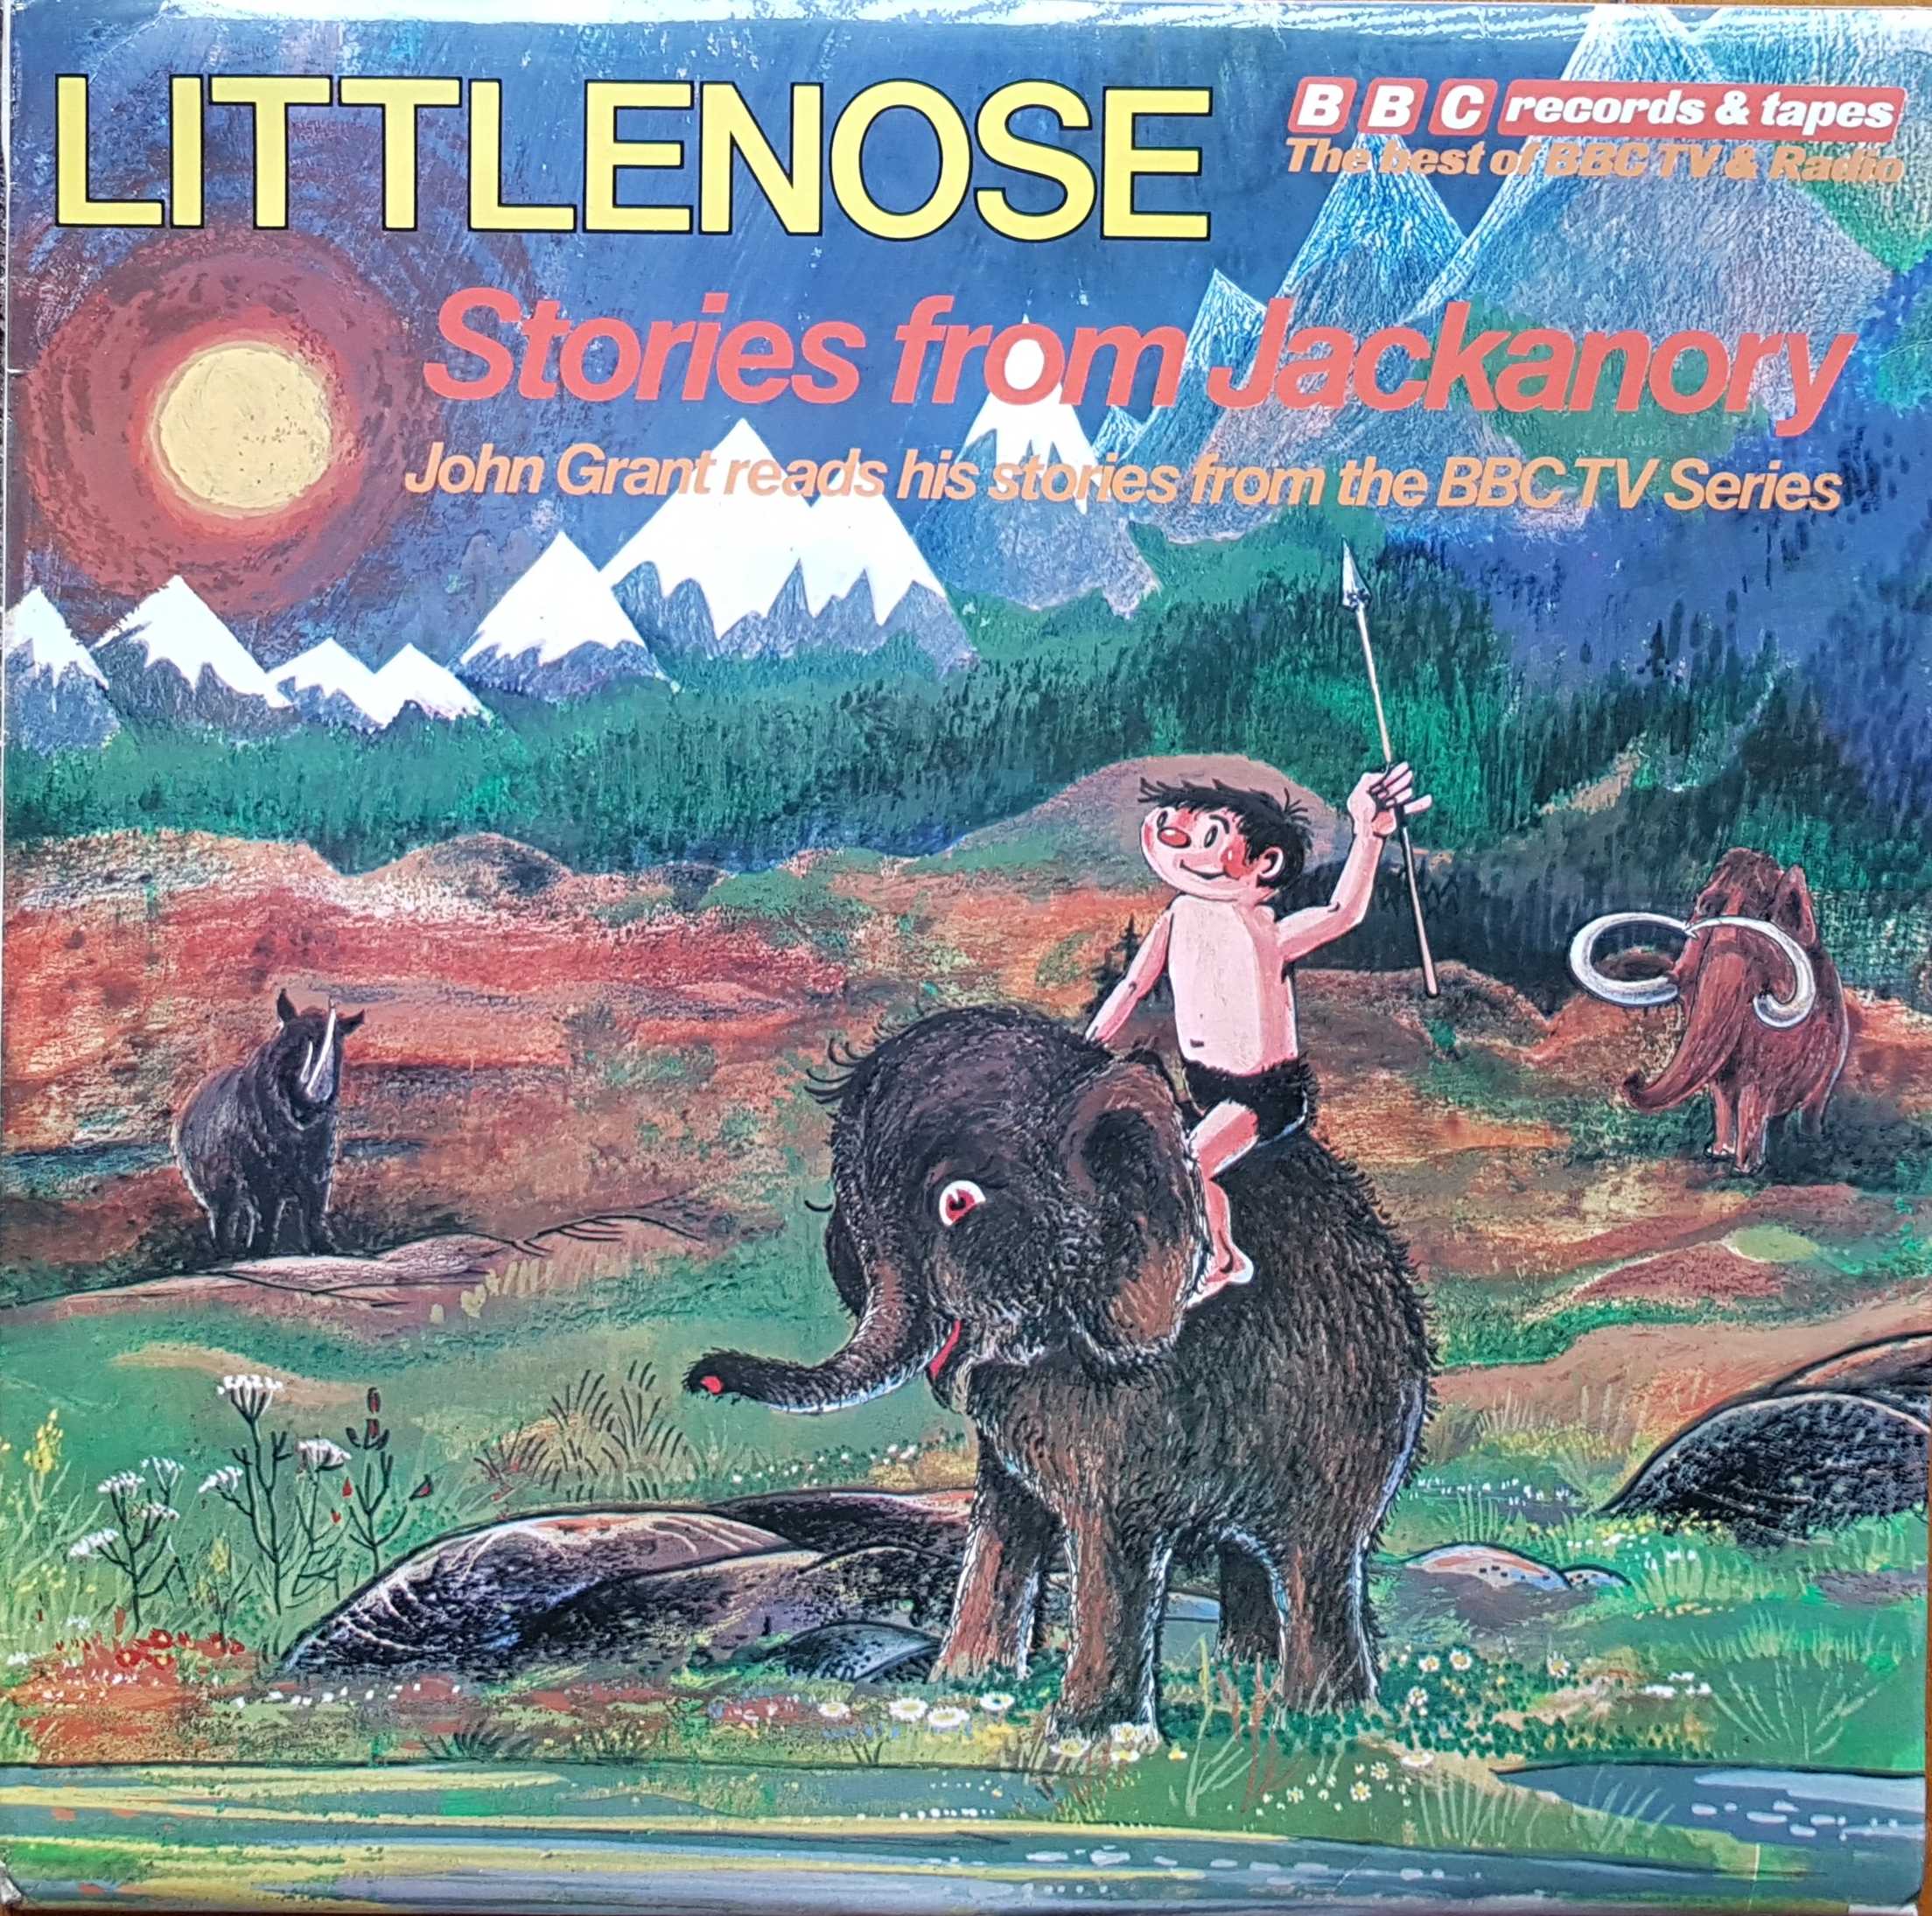 Picture of REC 229 Jackanory stories by artist John Grant from the BBC albums - Records and Tapes library